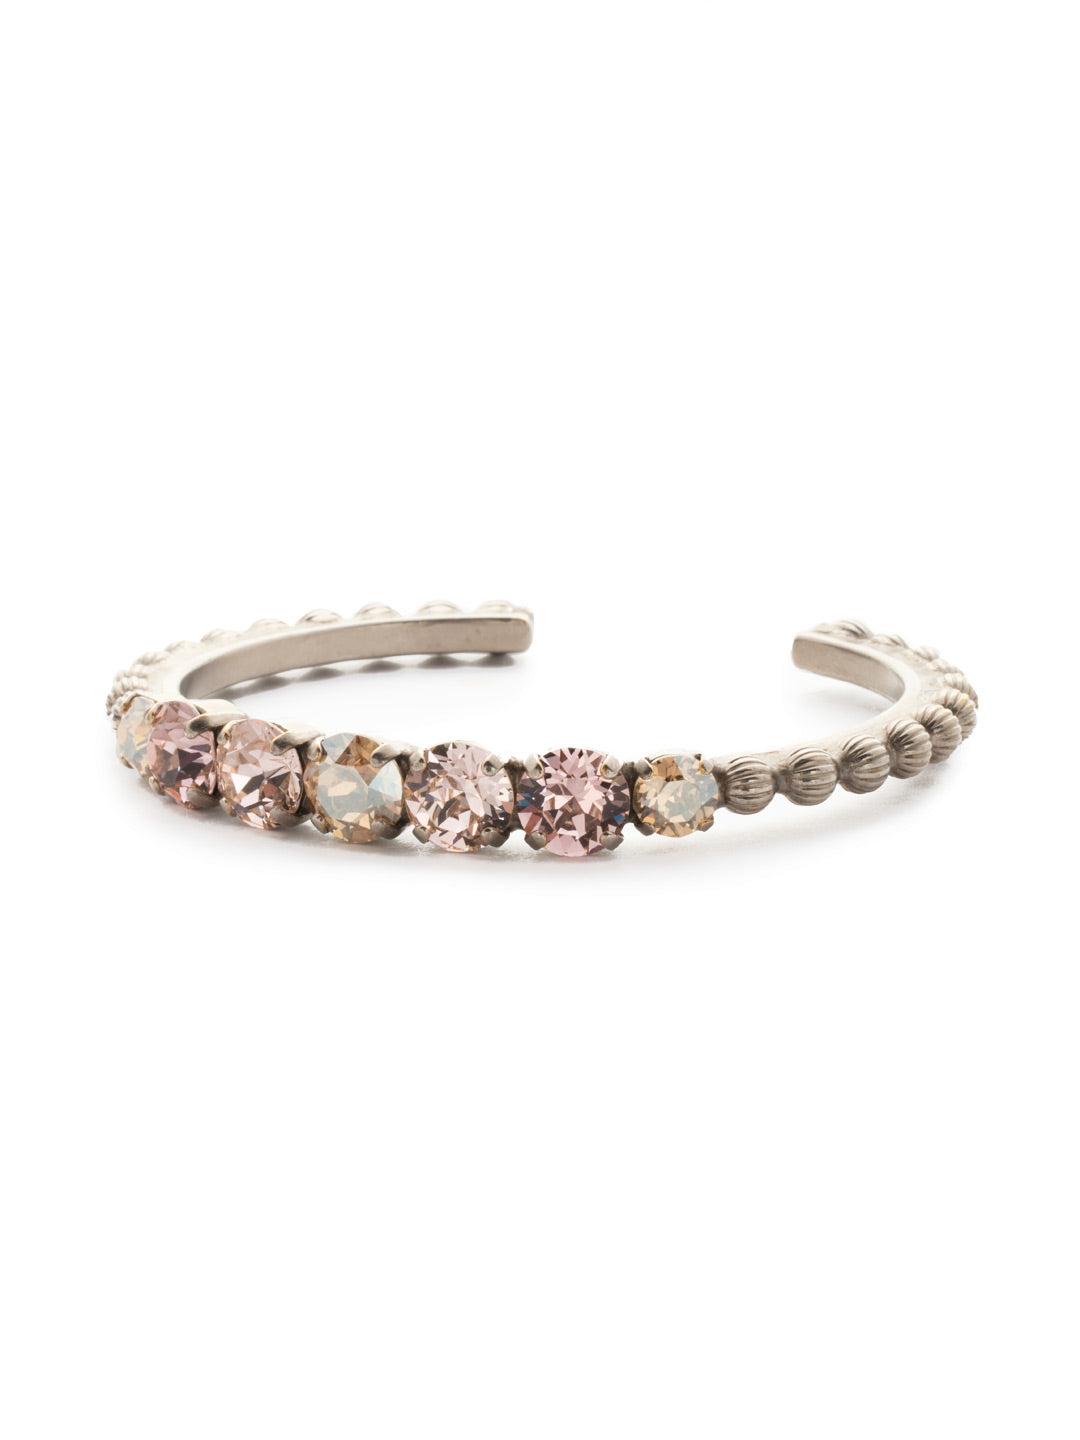 Mimosa Bracelet - BDQ24ASSBL - A stylish cuff bracelet with far-away flare! Decorative ball chain accents this adjustable cuff featuring round and oval cut crystals.